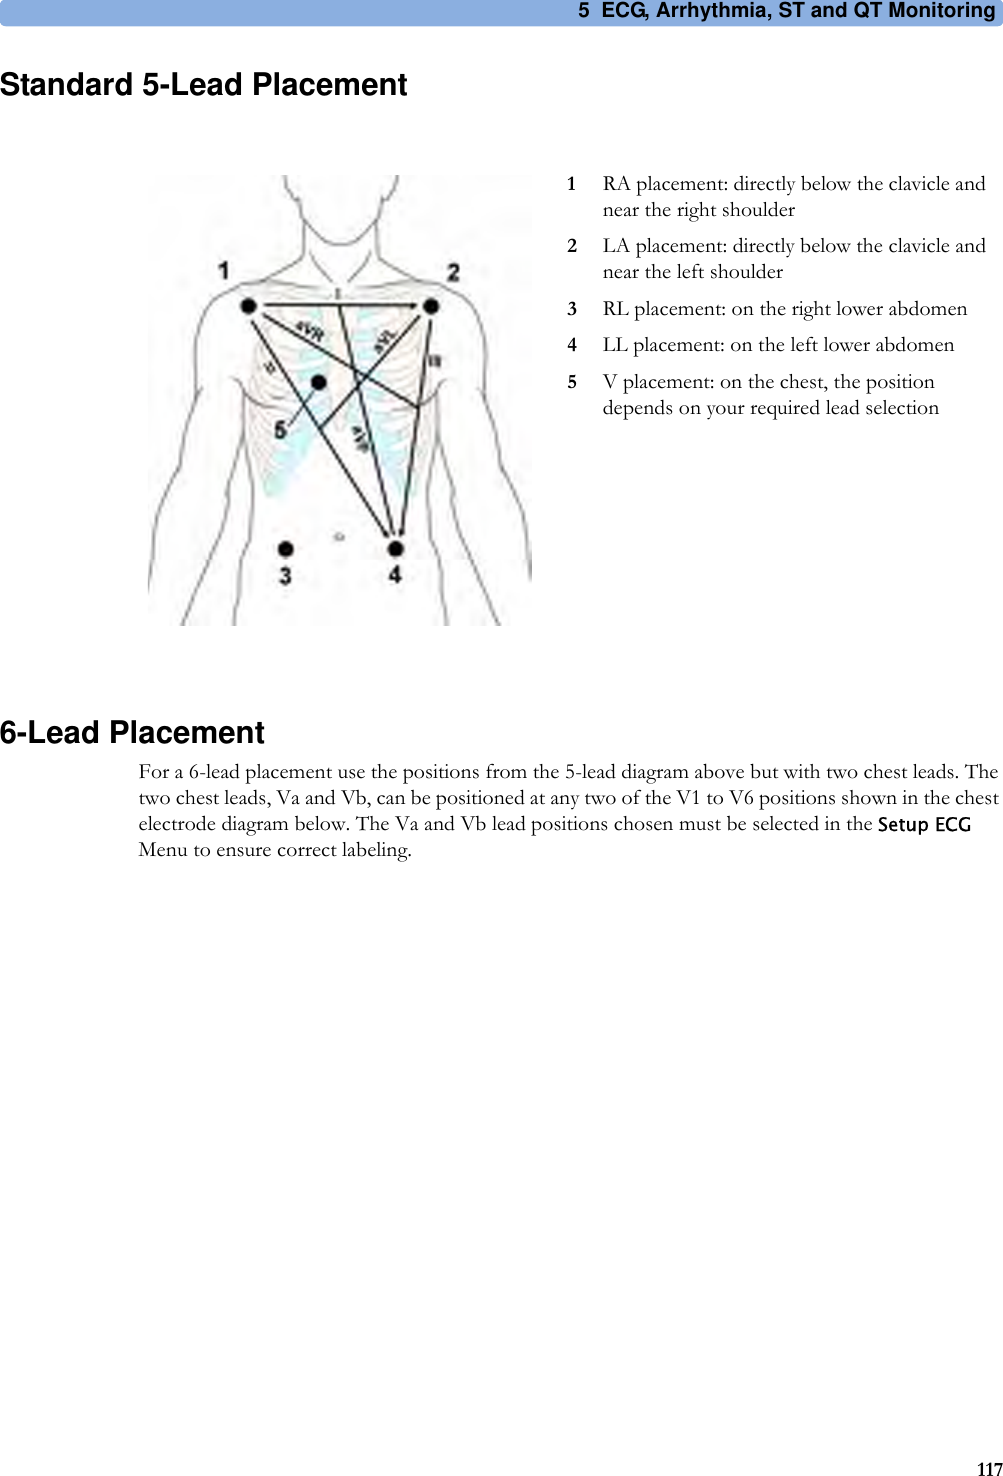 5 ECG, Arrhythmia, ST and QT Monitoring117Standard 5-Lead Placement6-Lead PlacementFor a 6-lead placement use the positions from the 5-lead diagram above but with two chest leads. The two chest leads, Va and Vb, can be positioned at any two of the V1 to V6 positions shown in the chest electrode diagram below. The Va and Vb lead positions chosen must be selected in the Setup ECG Menu to ensure correct labeling.1RA placement: directly below the clavicle and near the right shoulder2LA placement: directly below the clavicle and near the left shoulder3RL placement: on the right lower abdomen4LL placement: on the left lower abdomen5V placement: on the chest, the position depends on your required lead selection